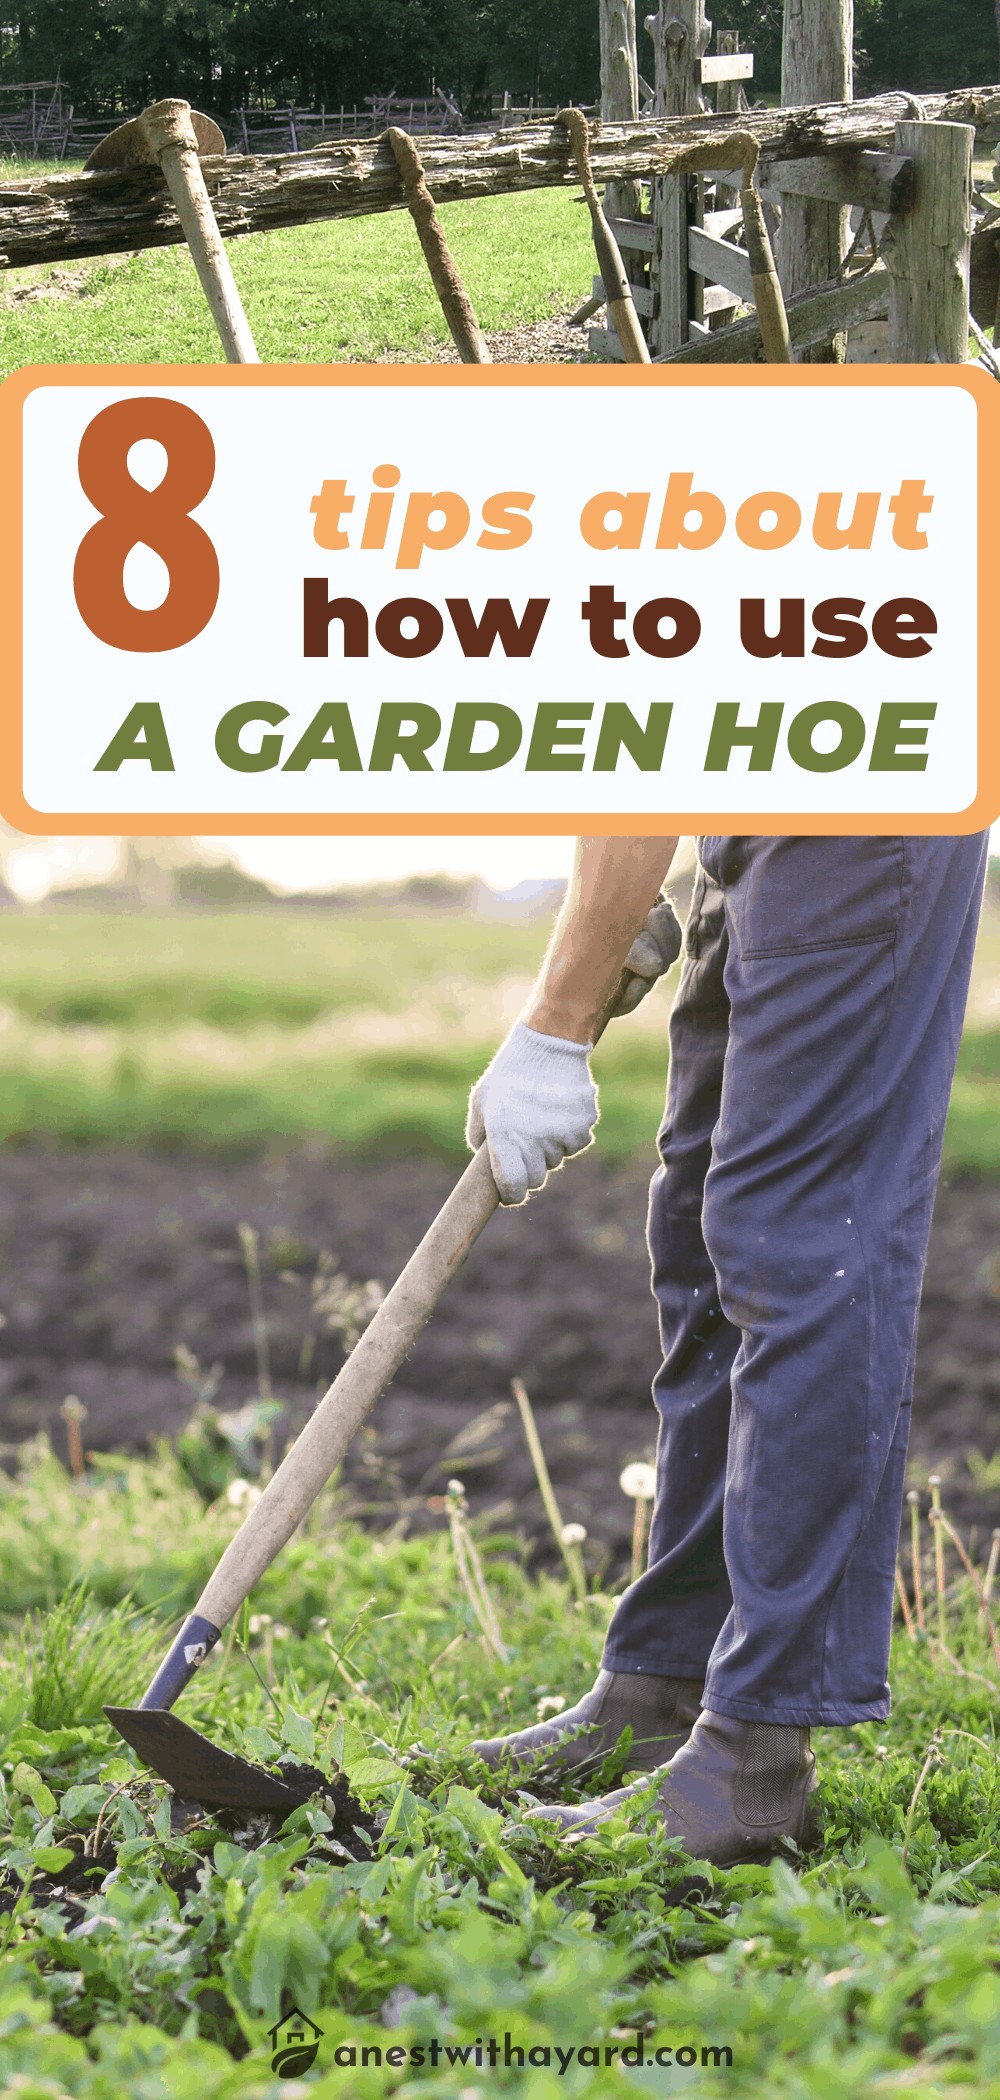 8 Tips on How to Use a Garden Hoe